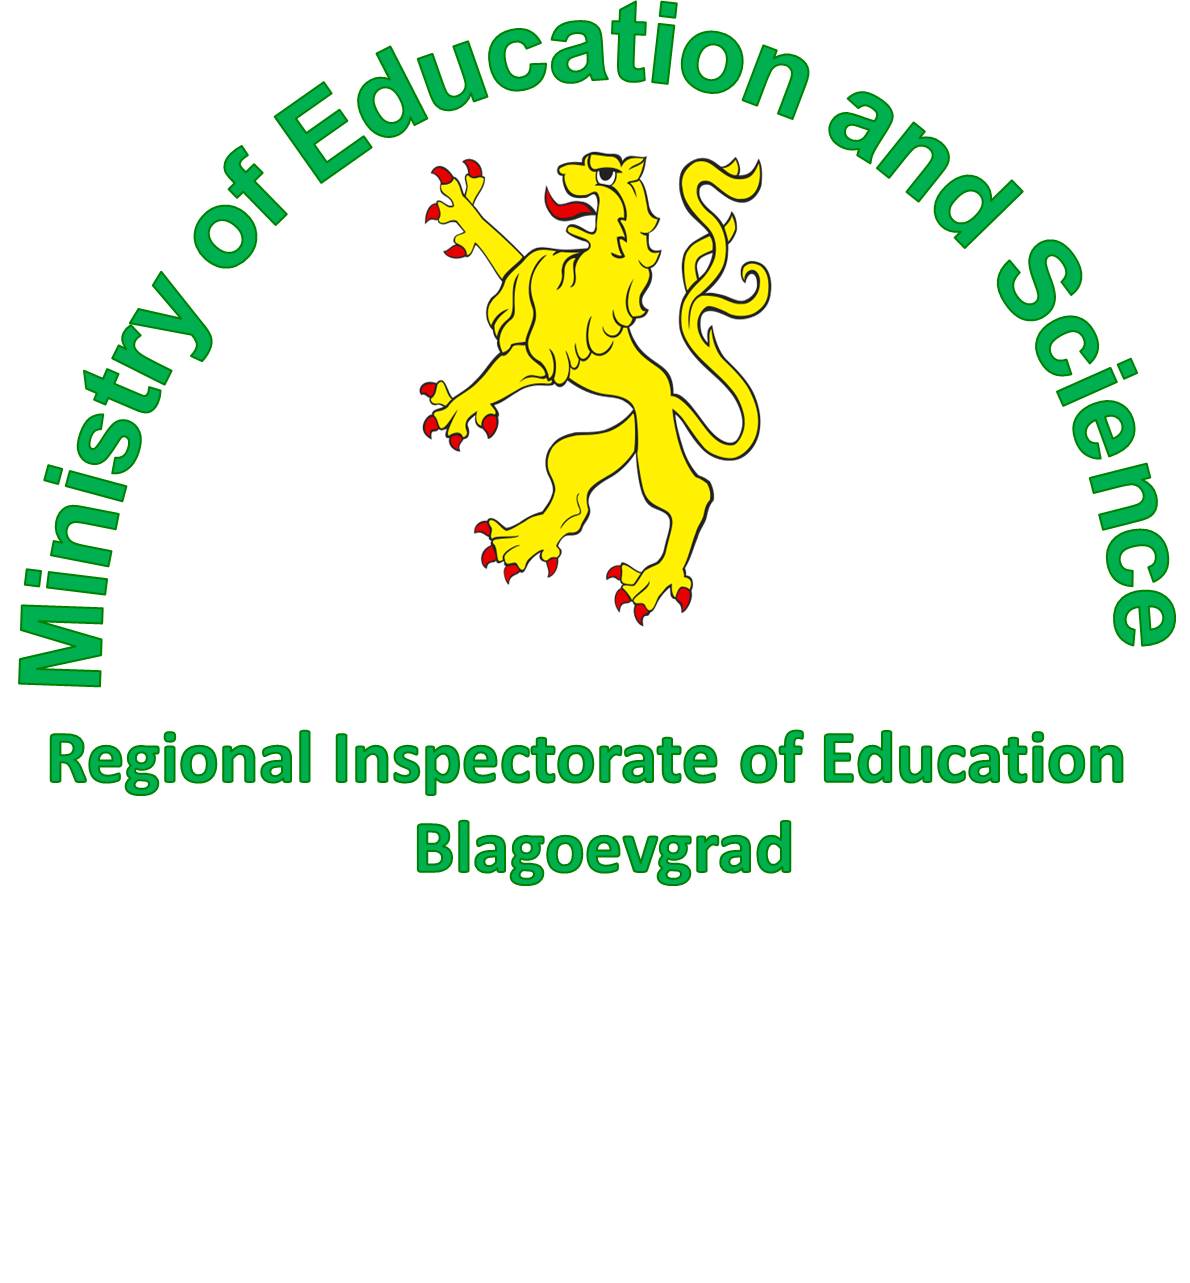 The Regional Inspectorate of Education (RIE), Bulgaria's logo